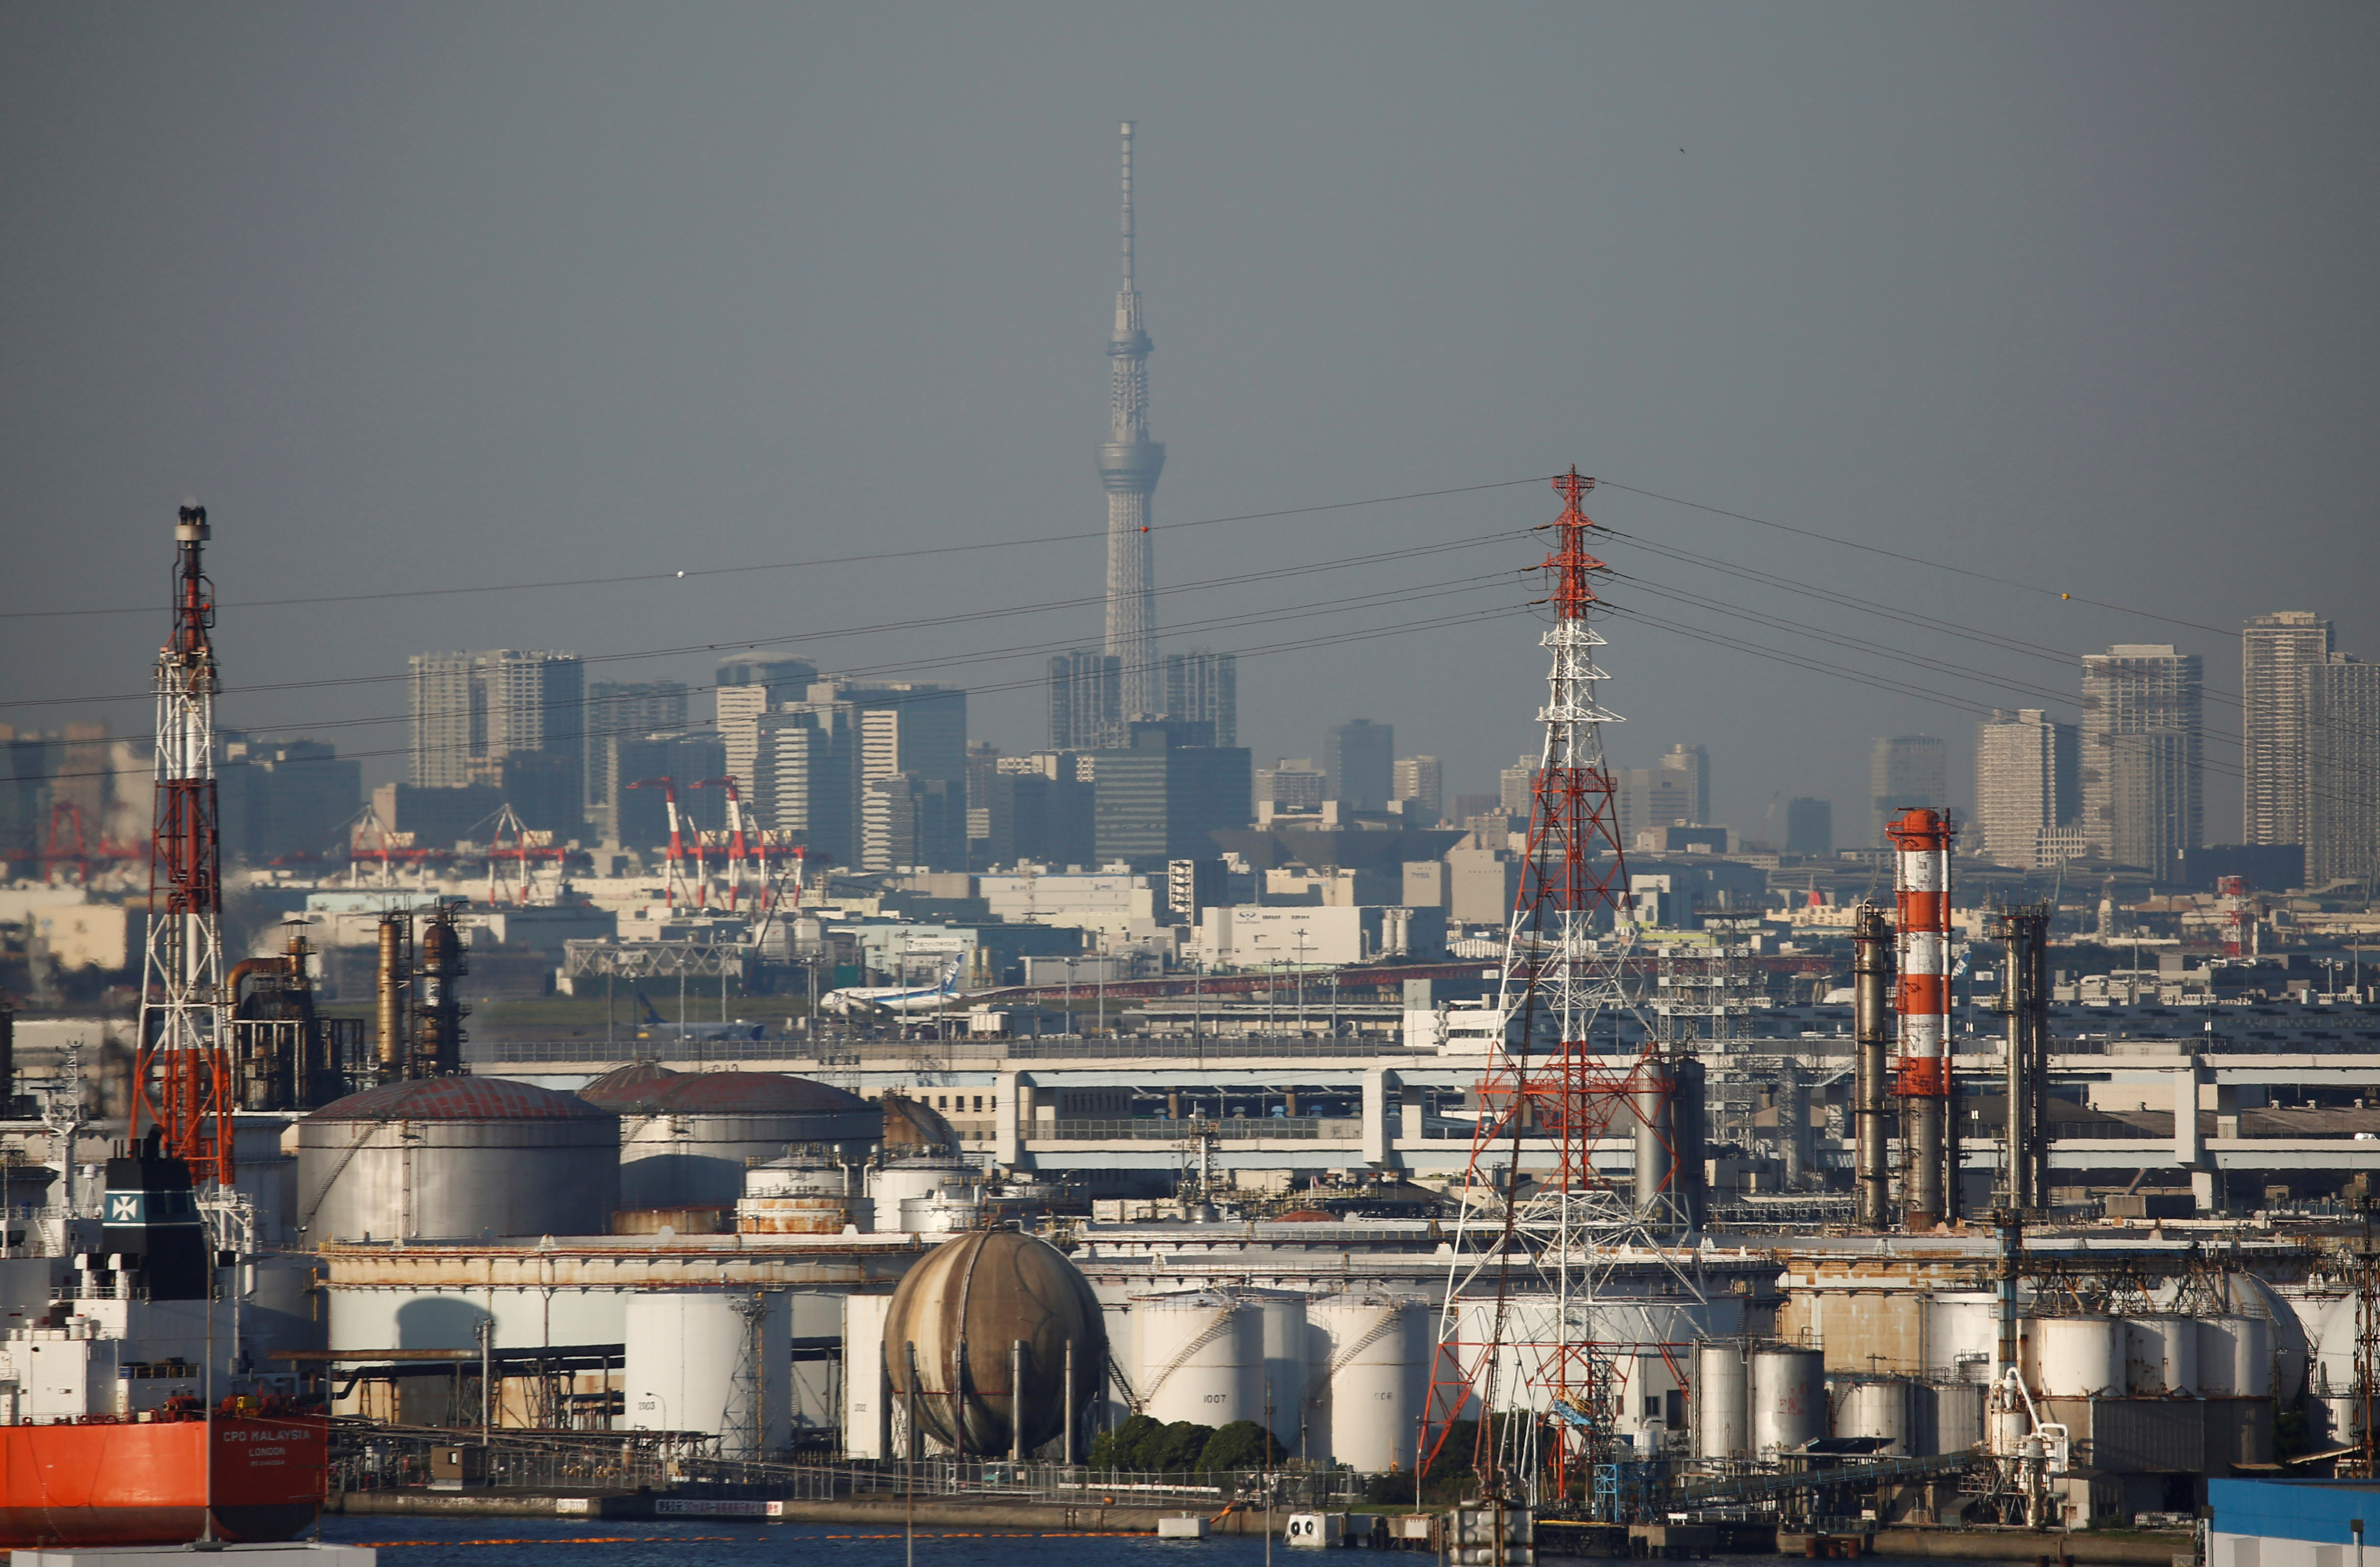 Chimneys of an industrial complex and Tokyo's skyline are seen from an observatory deck at an industrial port in Kawasaki